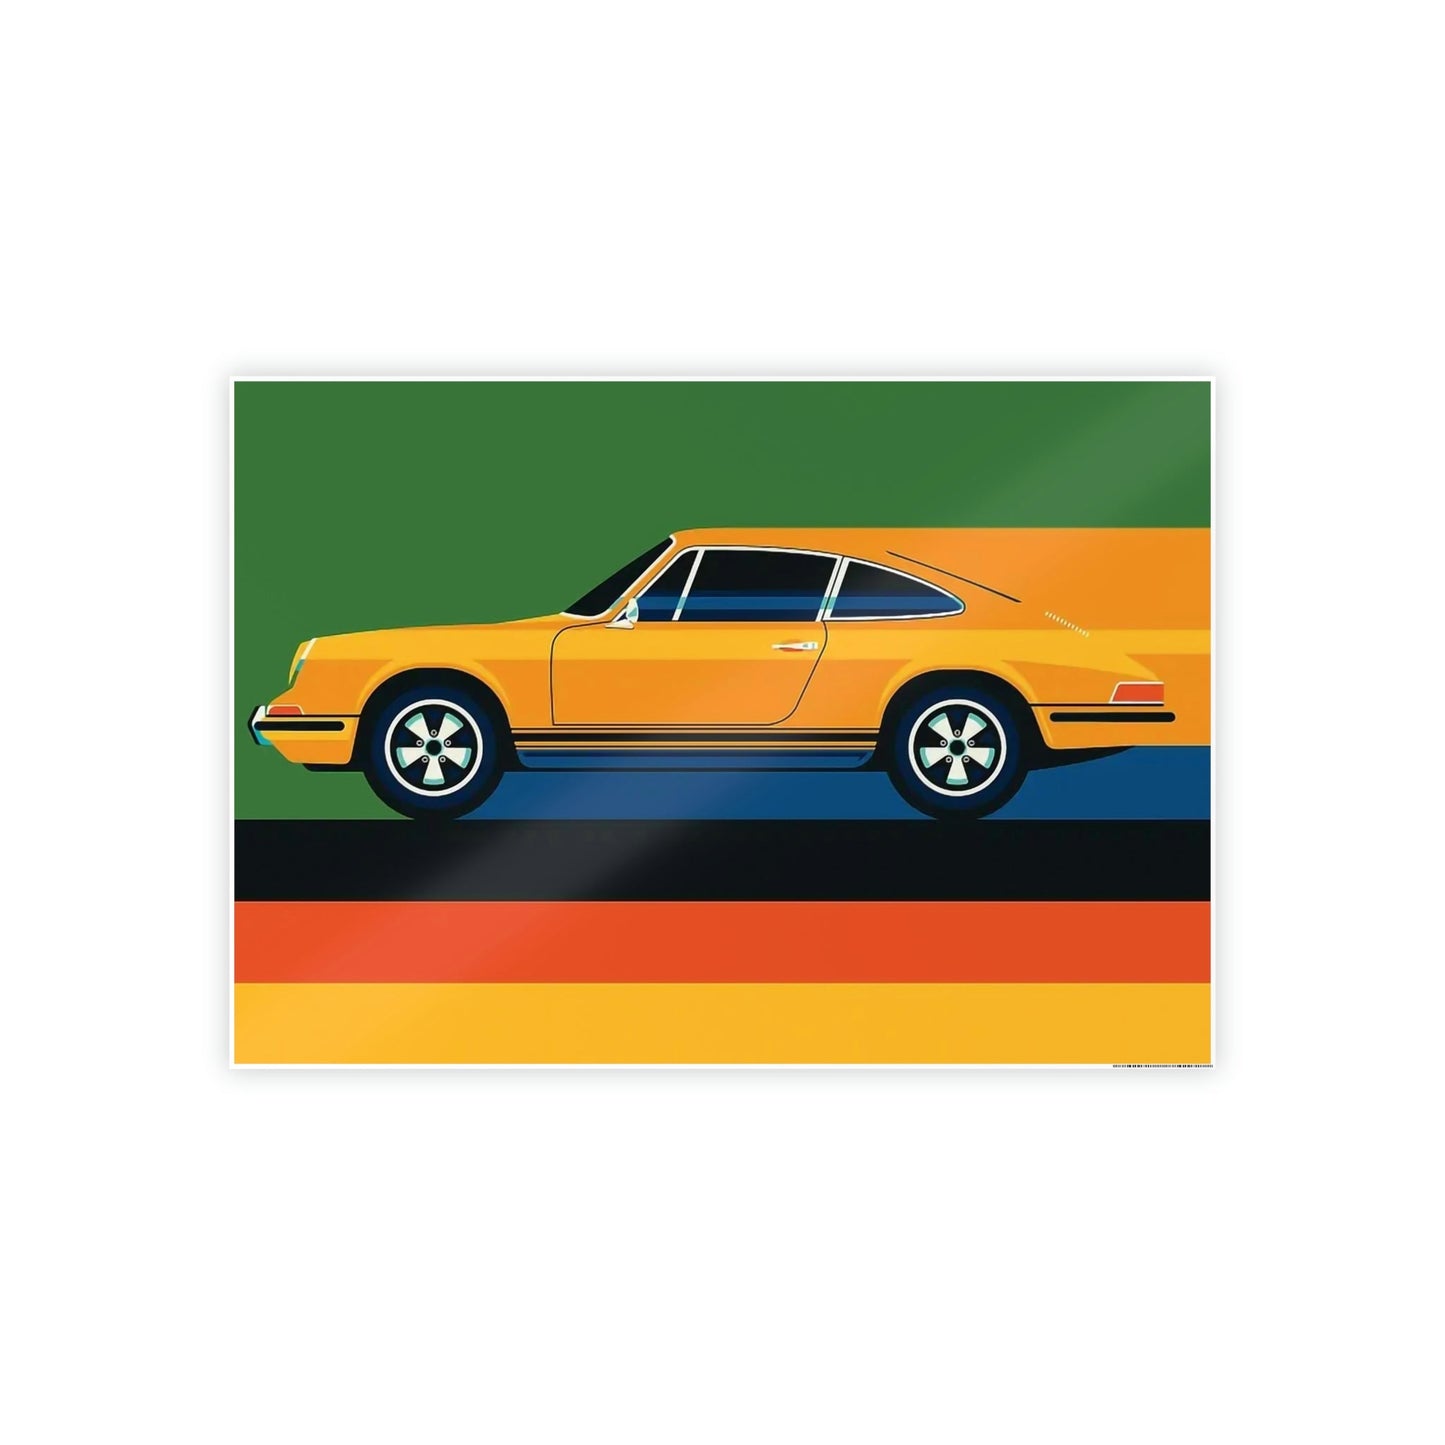 Legendary Speed: A Print on Canvas & Poster of the Classic Porsche